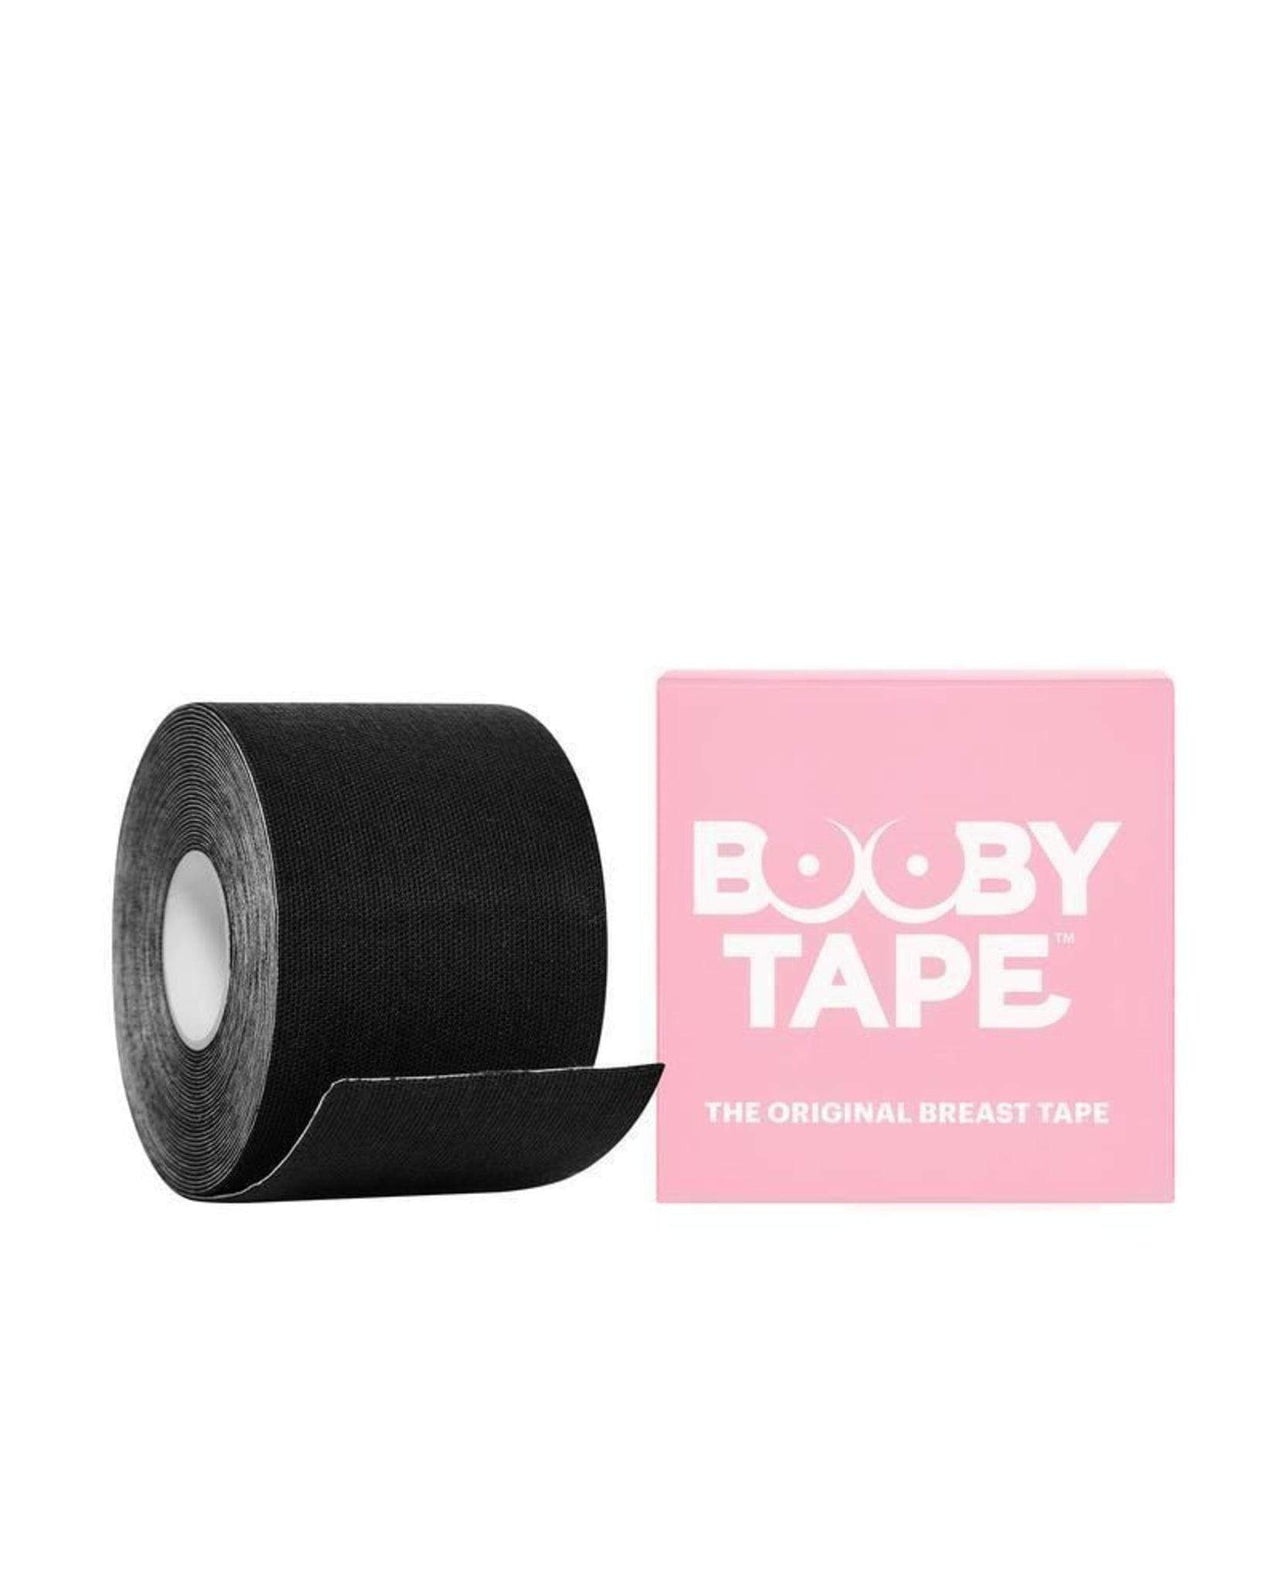 Booby Tape Black, Essentials Acc by Booby Tape | LIT Boutique